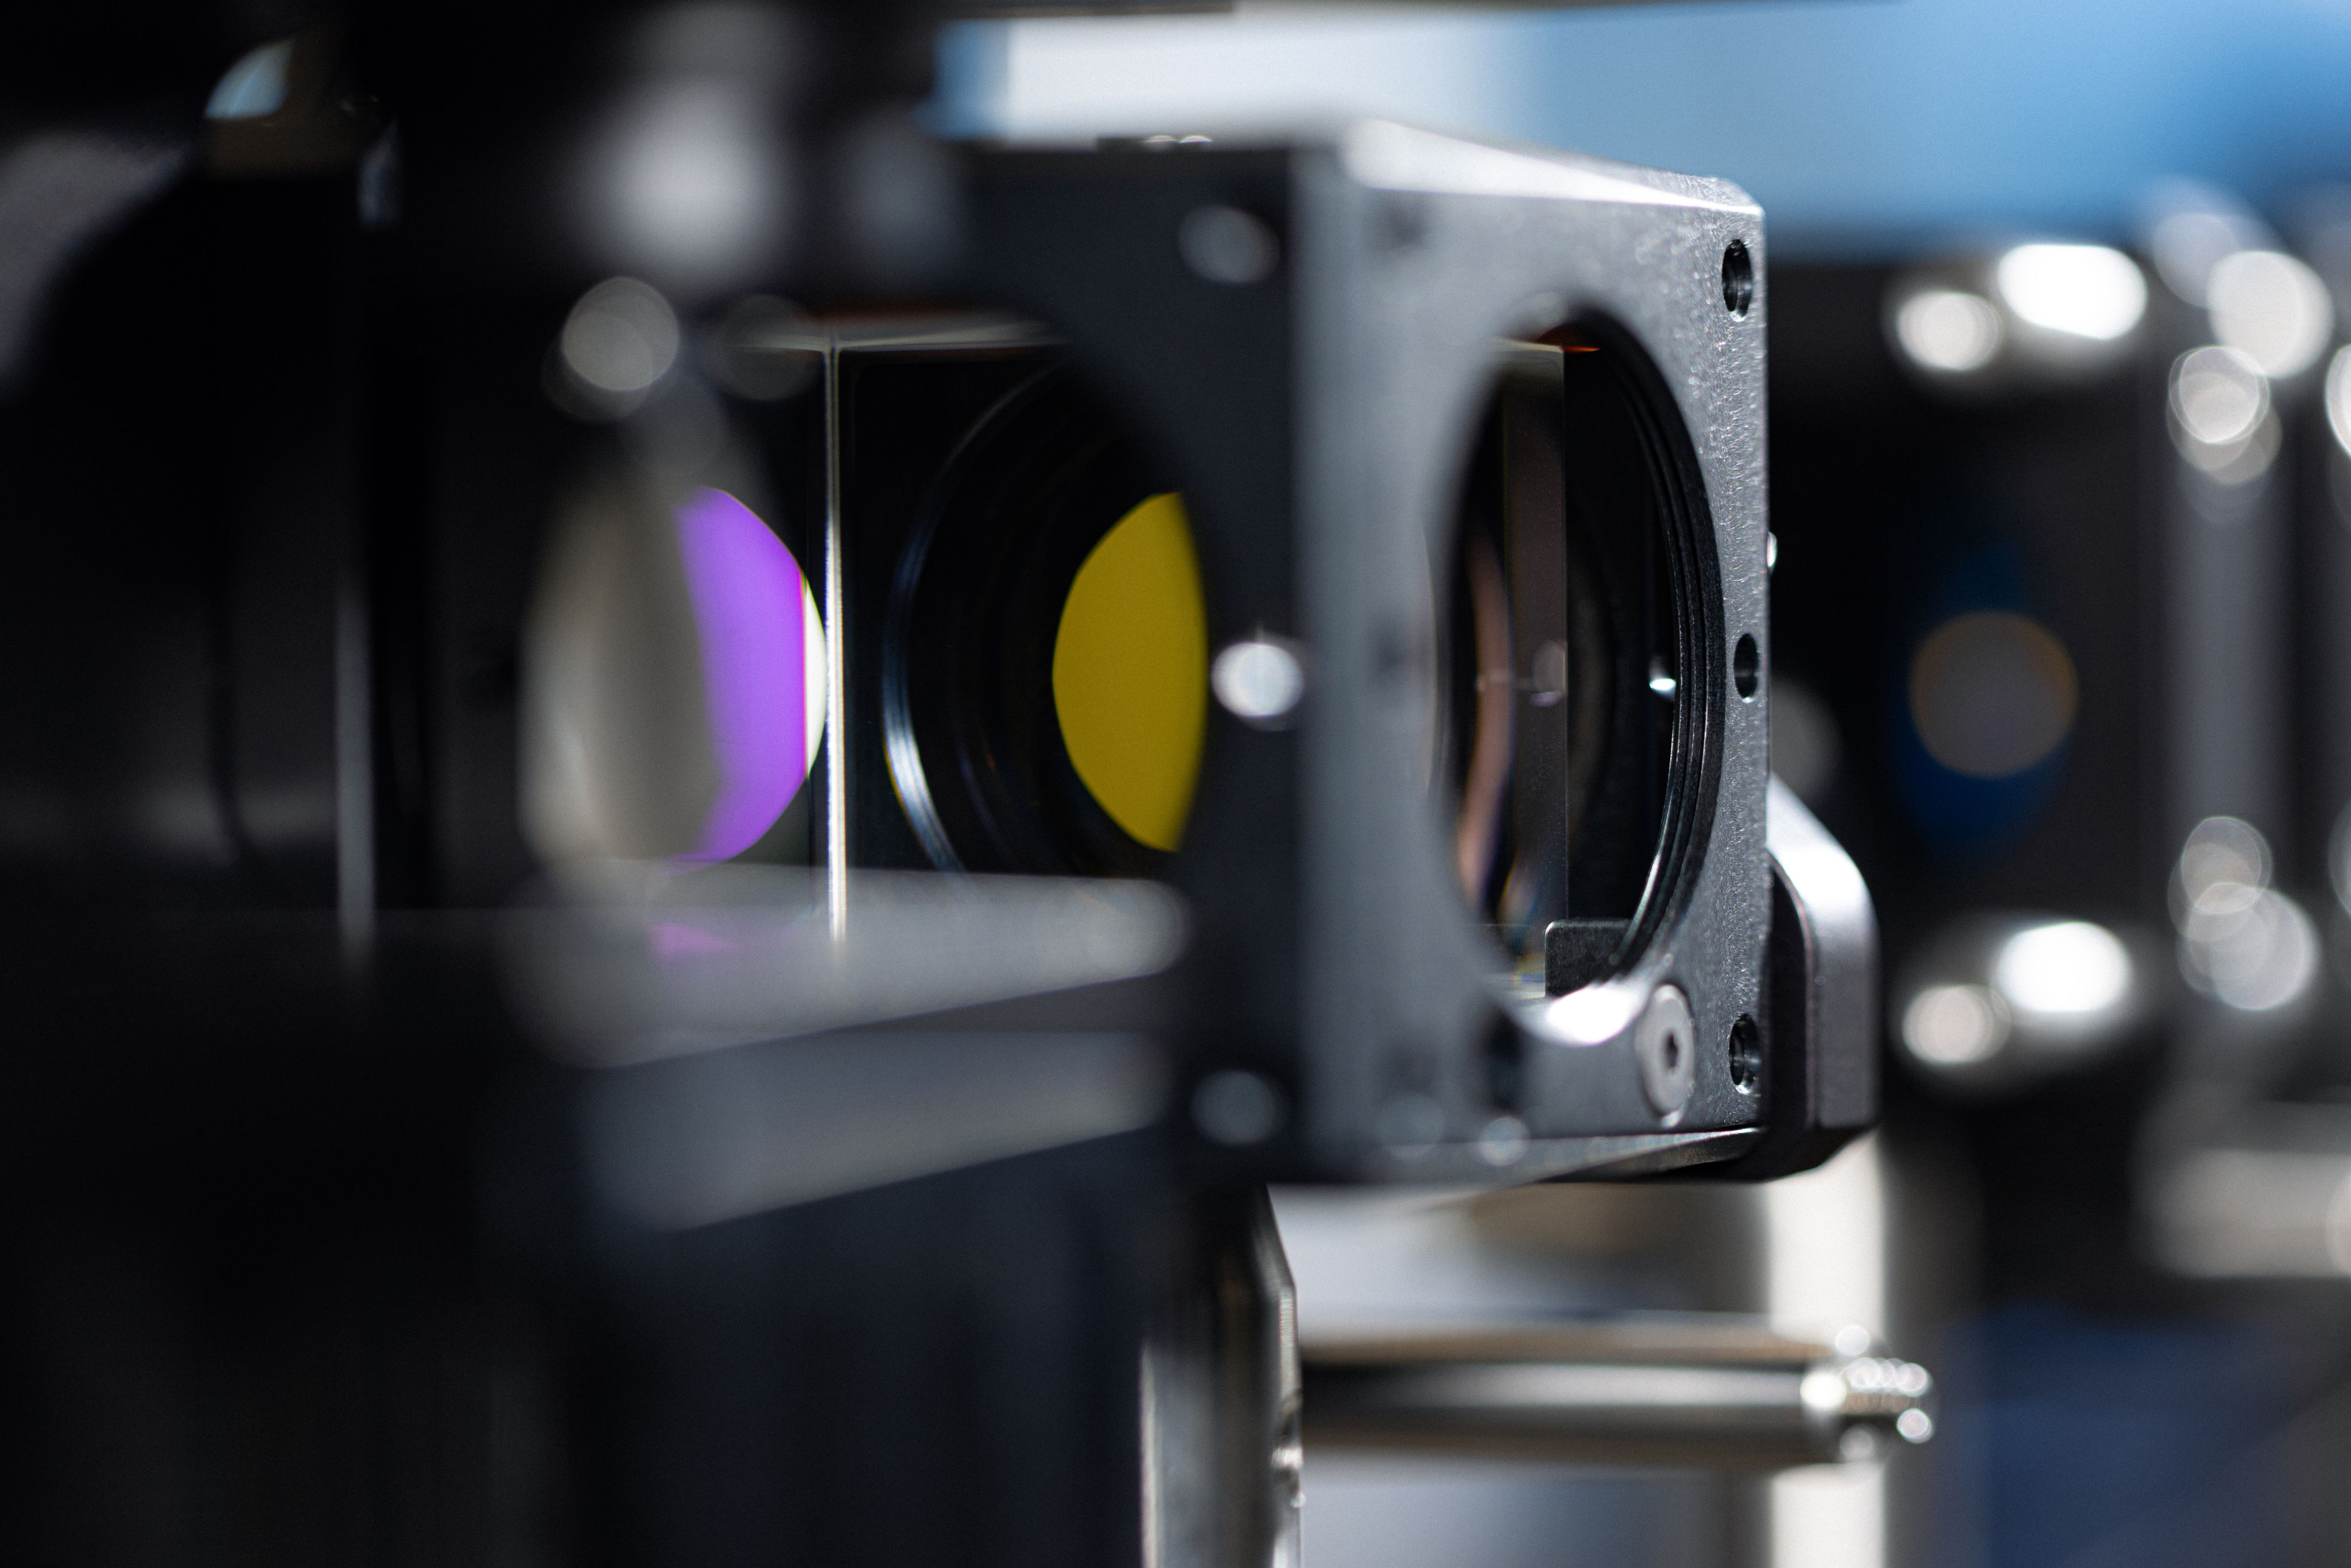 Lenses and mirrors in a lab setting photographed with shallow depth of field.